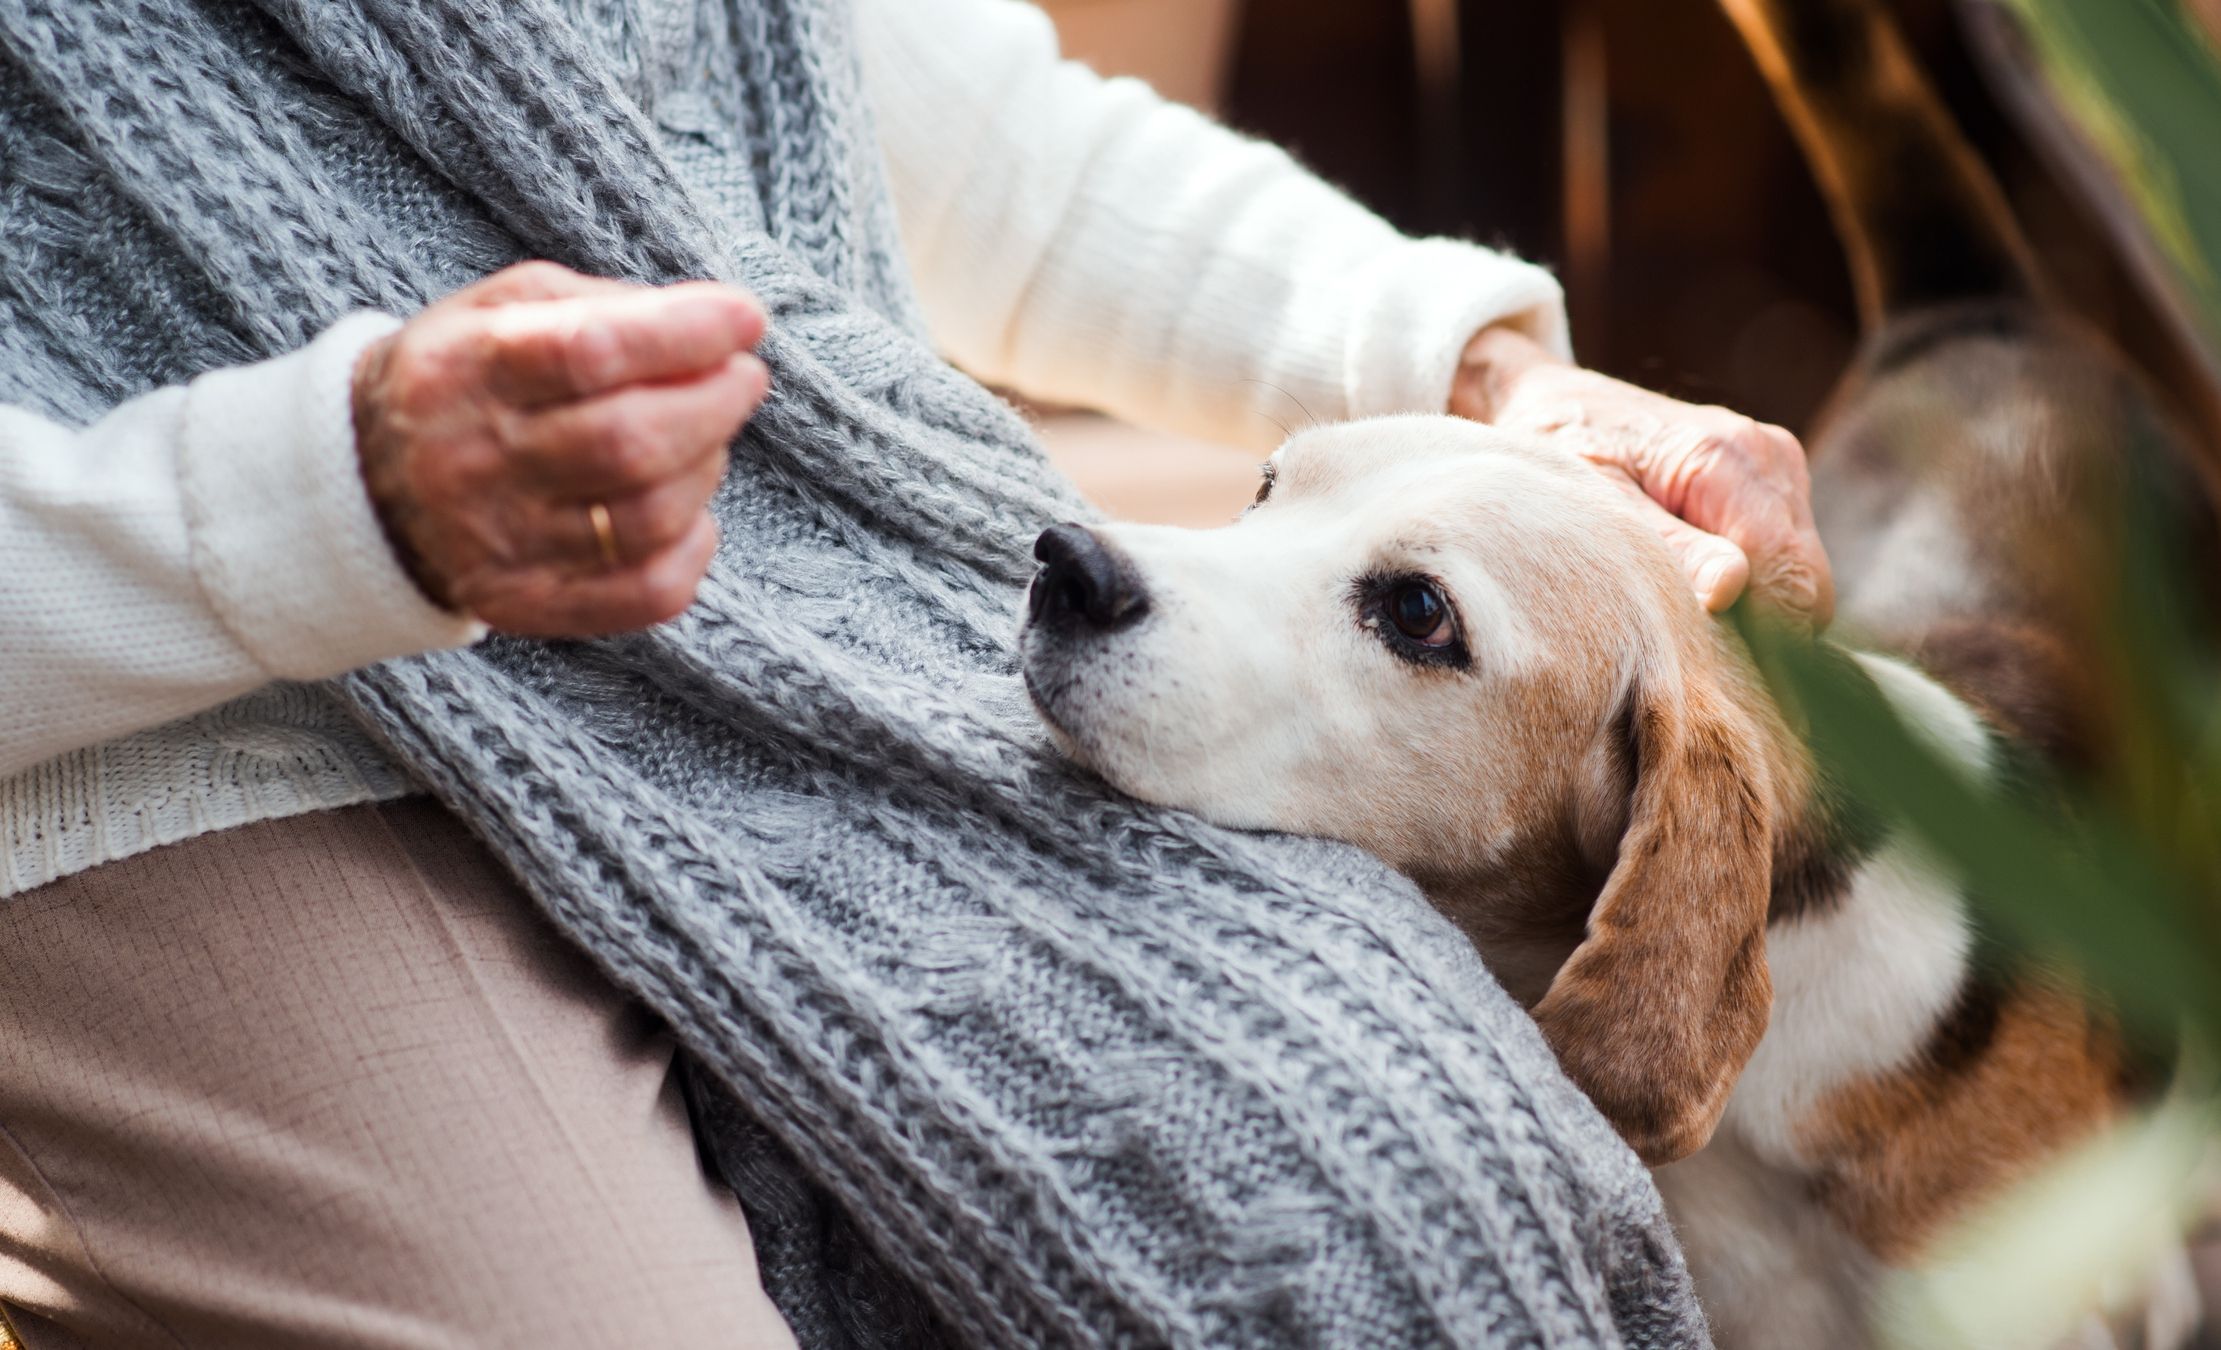 New research from the University of Michigan has found that long-time pet owners in their mid-60s had higher cognitive scores than people of the same age group without pets.